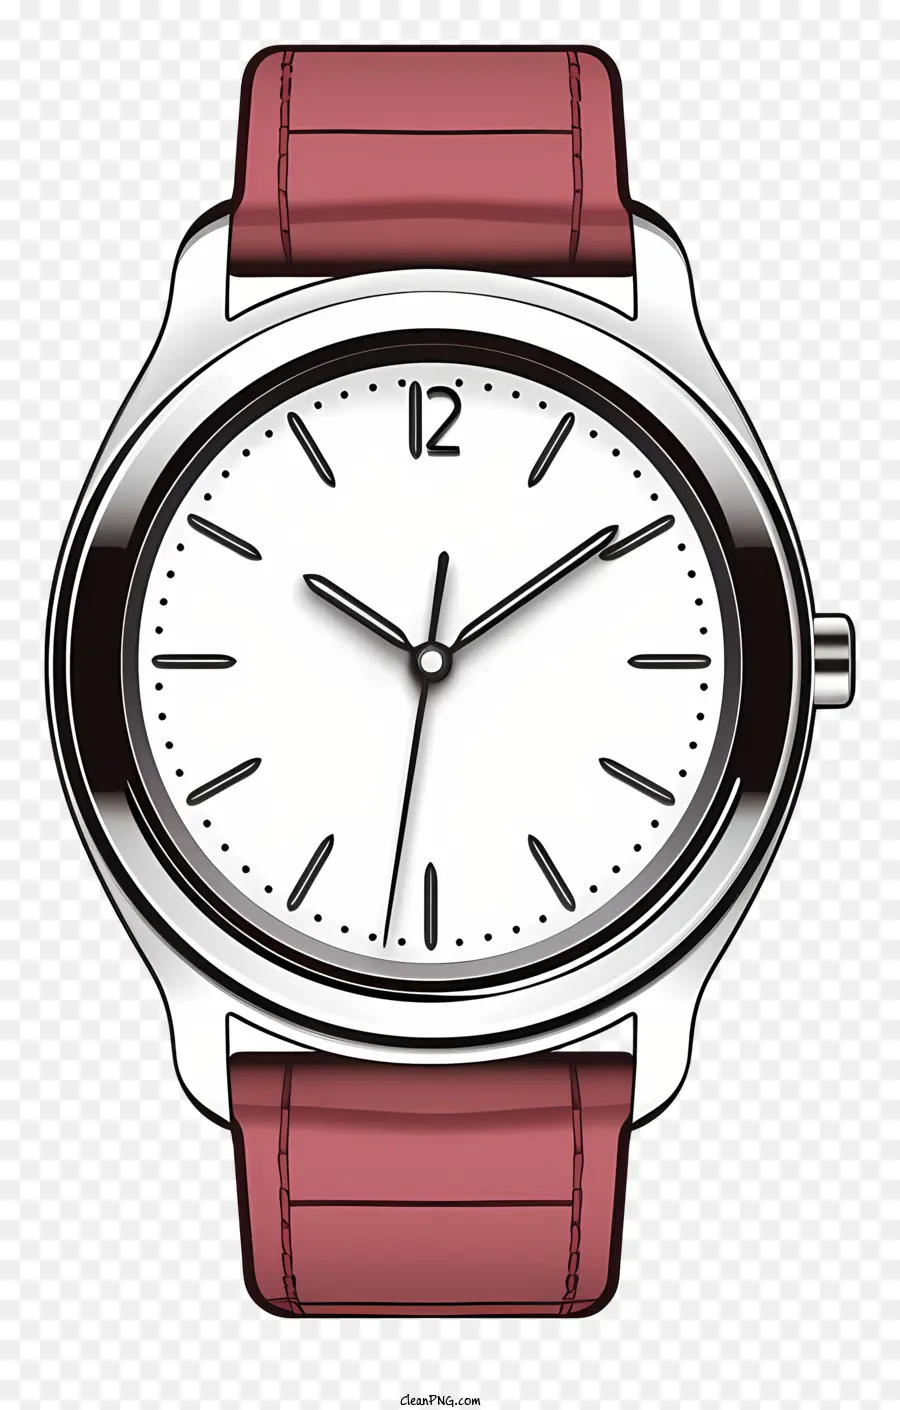 white wrist watch pink leather strap classic style watch white dial black numerals